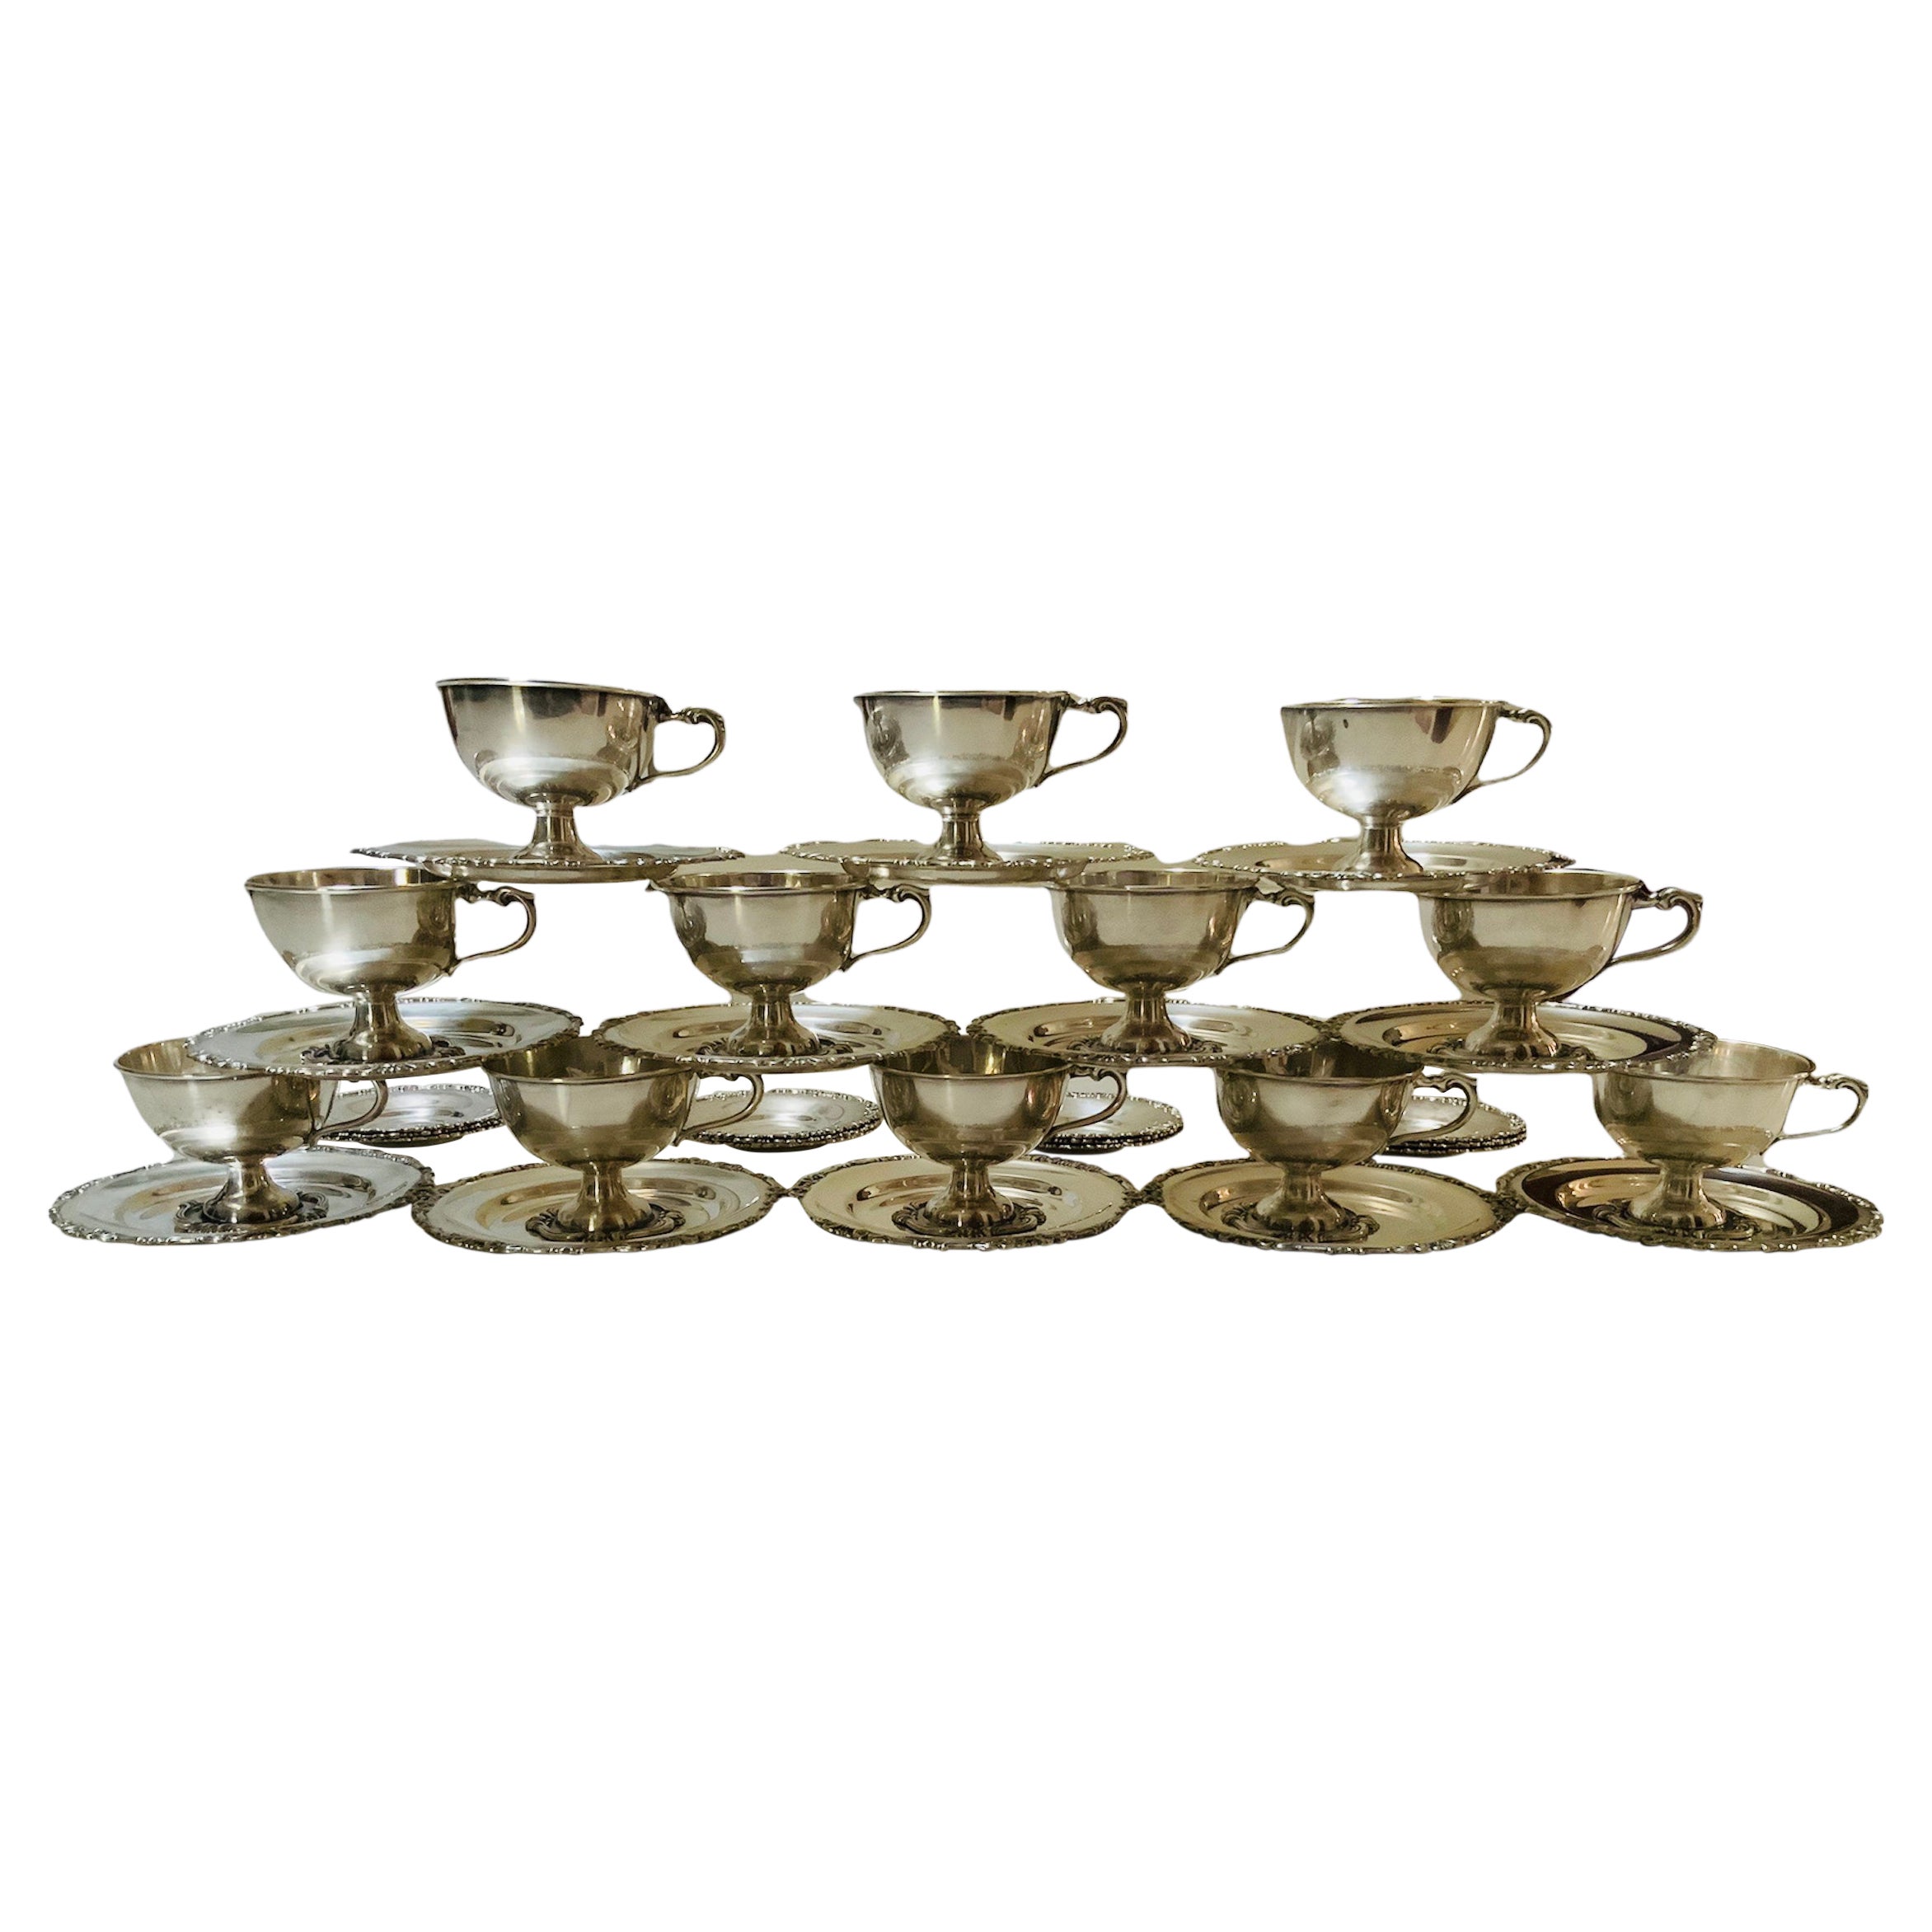 Set of Camusso 925 Sterling Cups, Saucers and Bread/Butter or Appetizer Plates